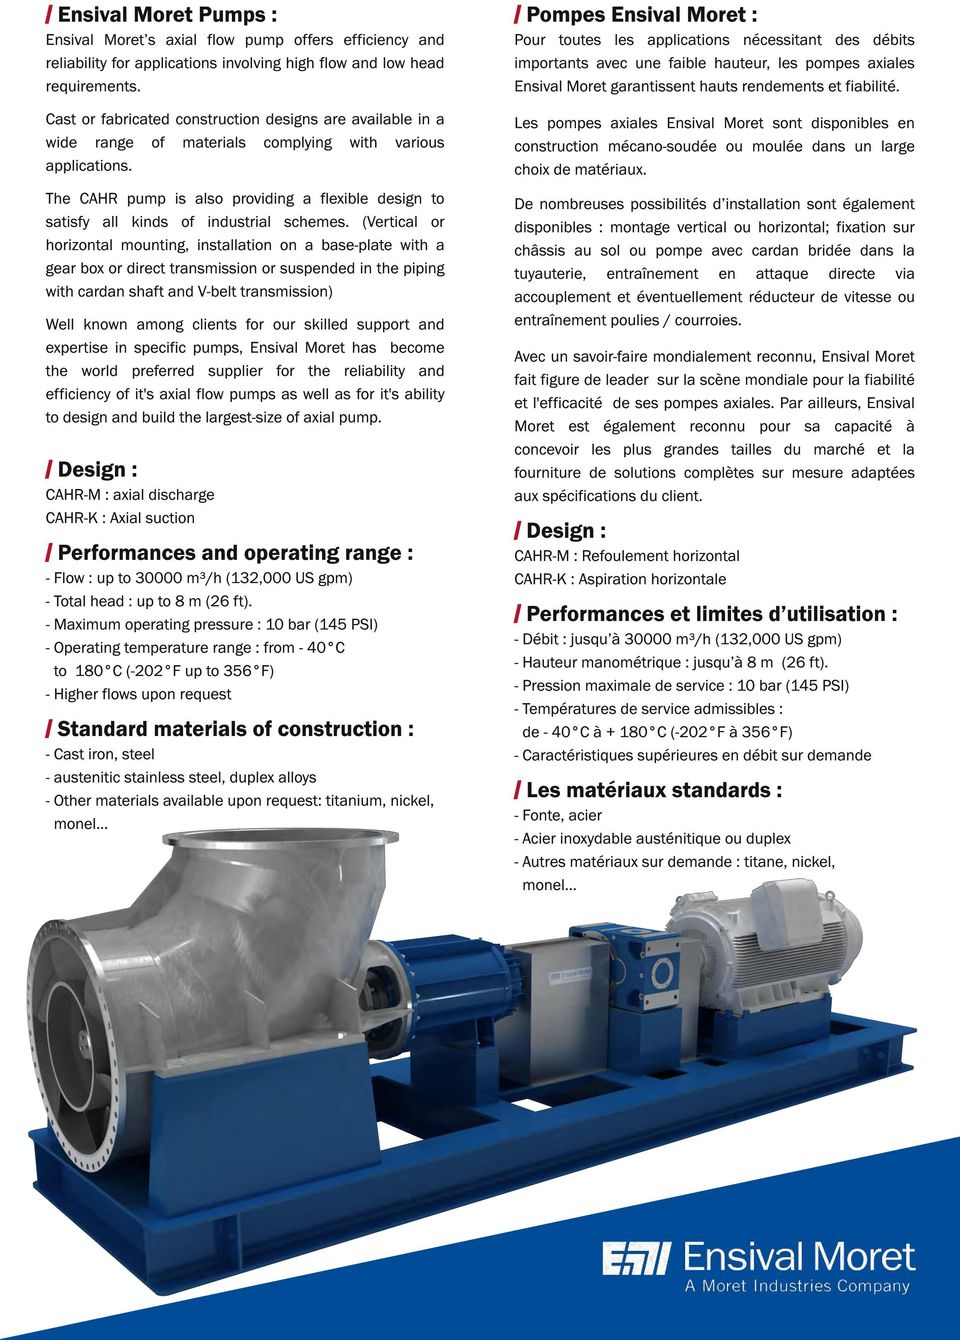 The CAHR pump is also providing a flexible design to satisfy all kinds of industrial schemes.